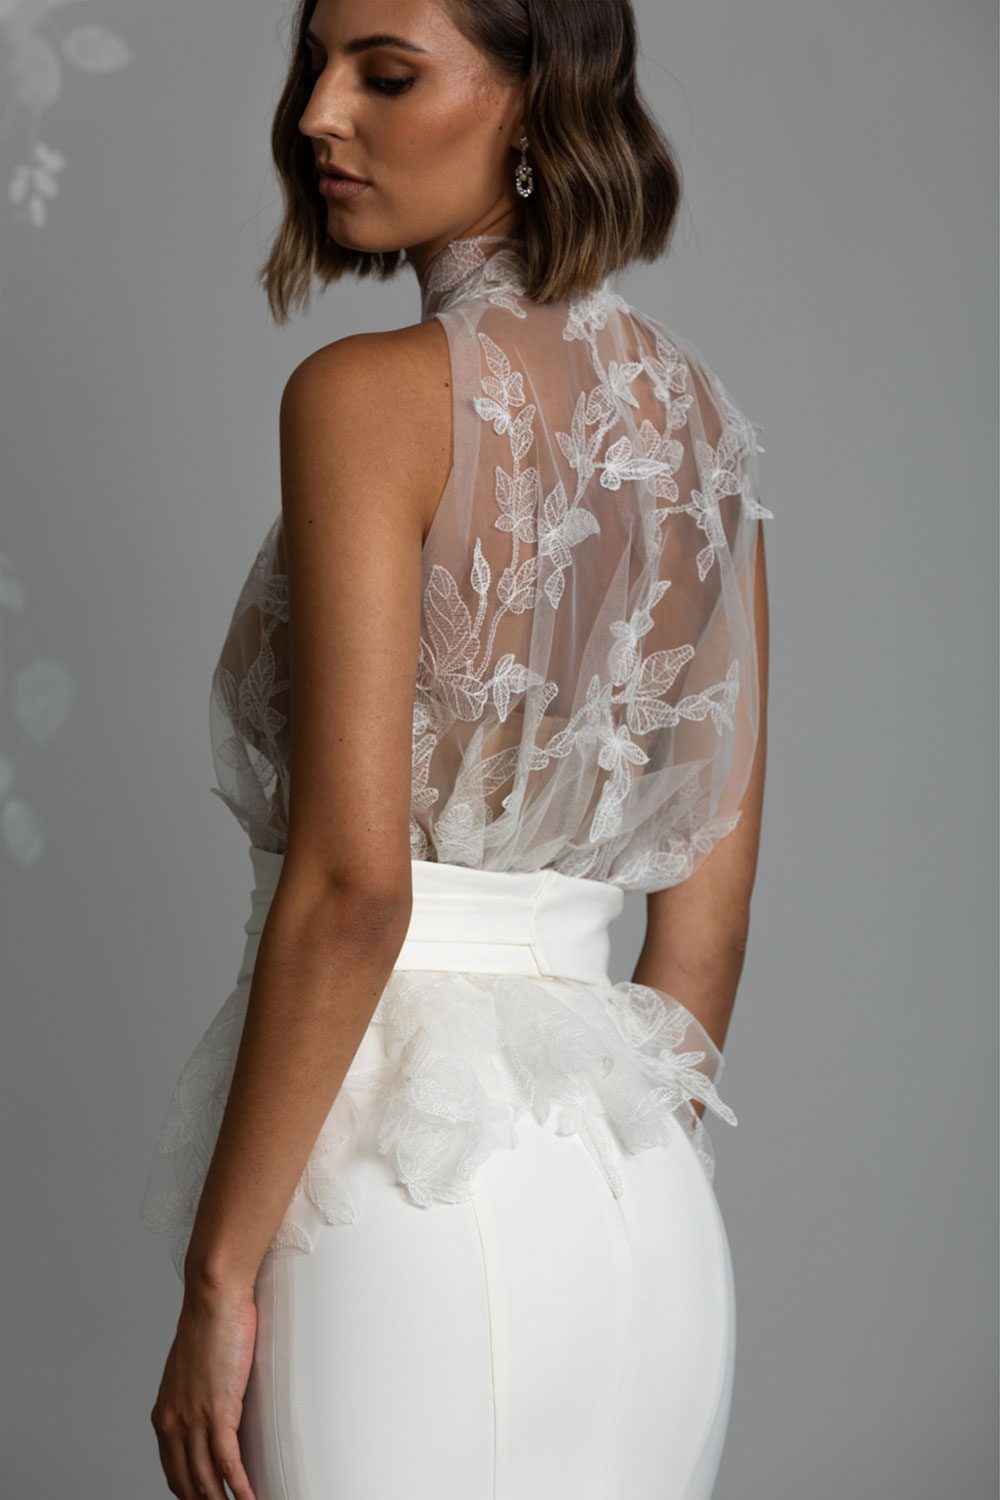 Mio Wedding Dress from Vinka Design. The front detail of gown with a high necked delicately hand-embroidered leaf lace cinched in at the waist with a wide kimono belt with skirt. Back view of dress with top with leaf lace embroidery and cinched waist with kimono belt